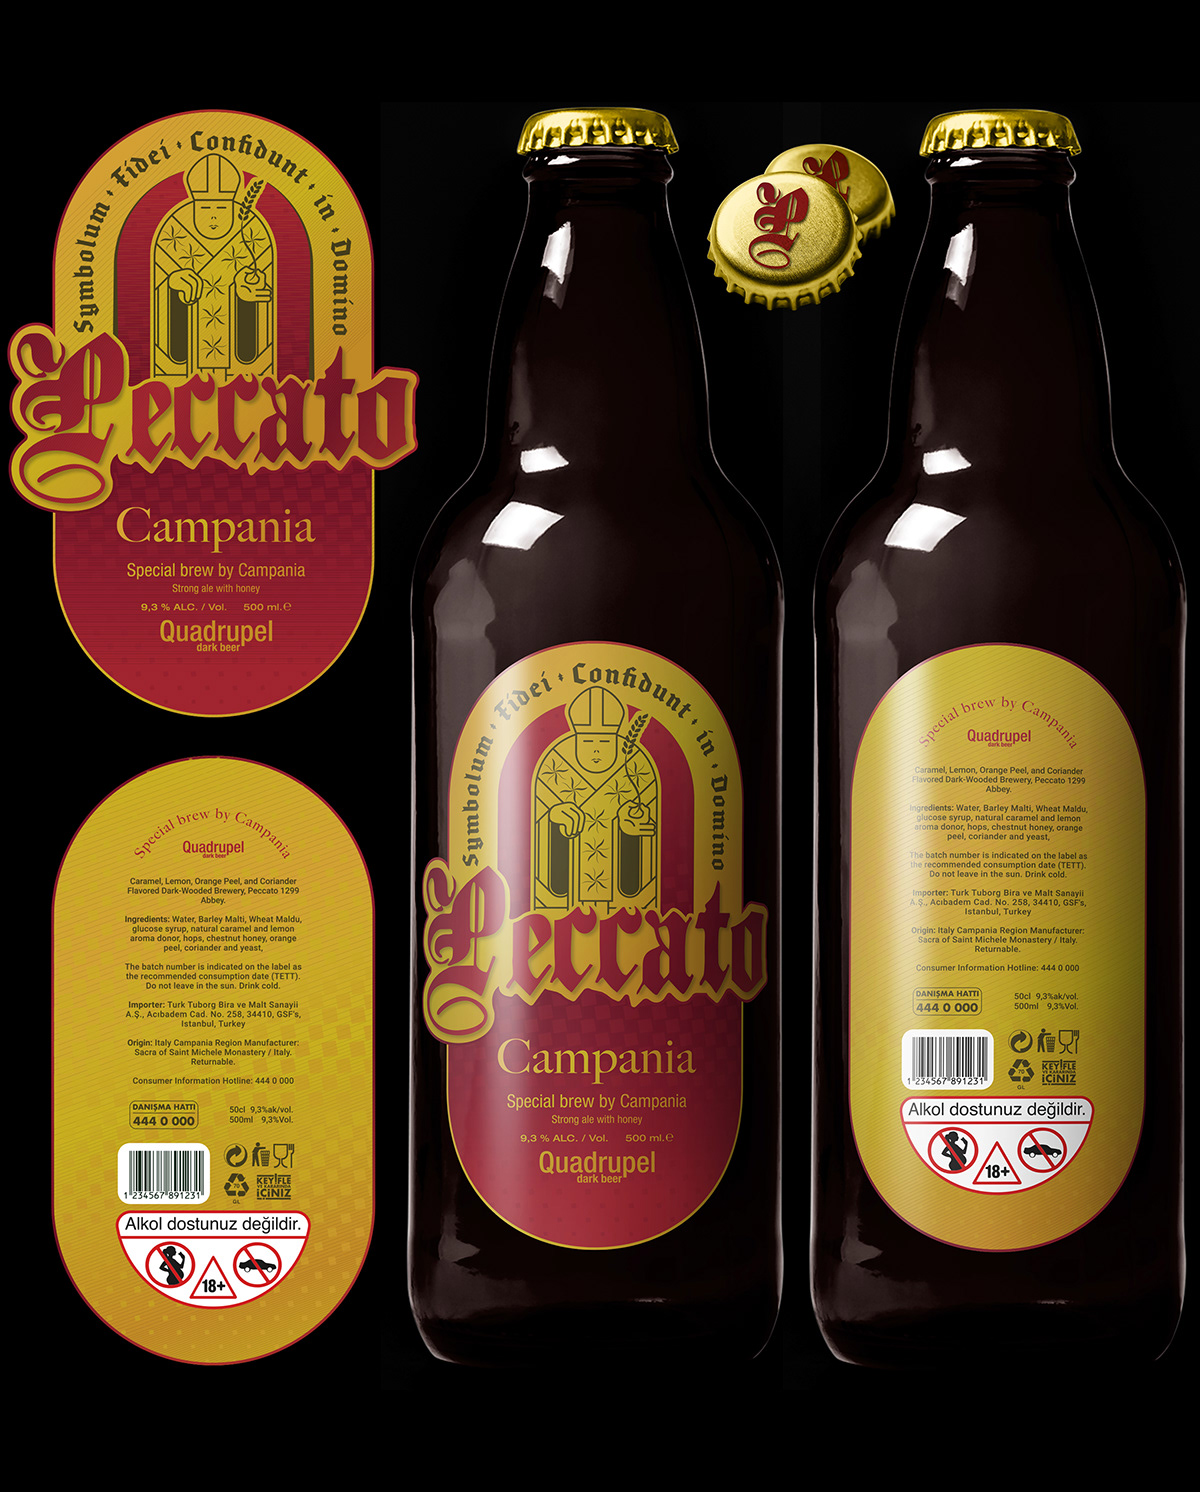 branding  logo ILLUSTRATION  beer Packaging graphic design  empaques monastery poster identity